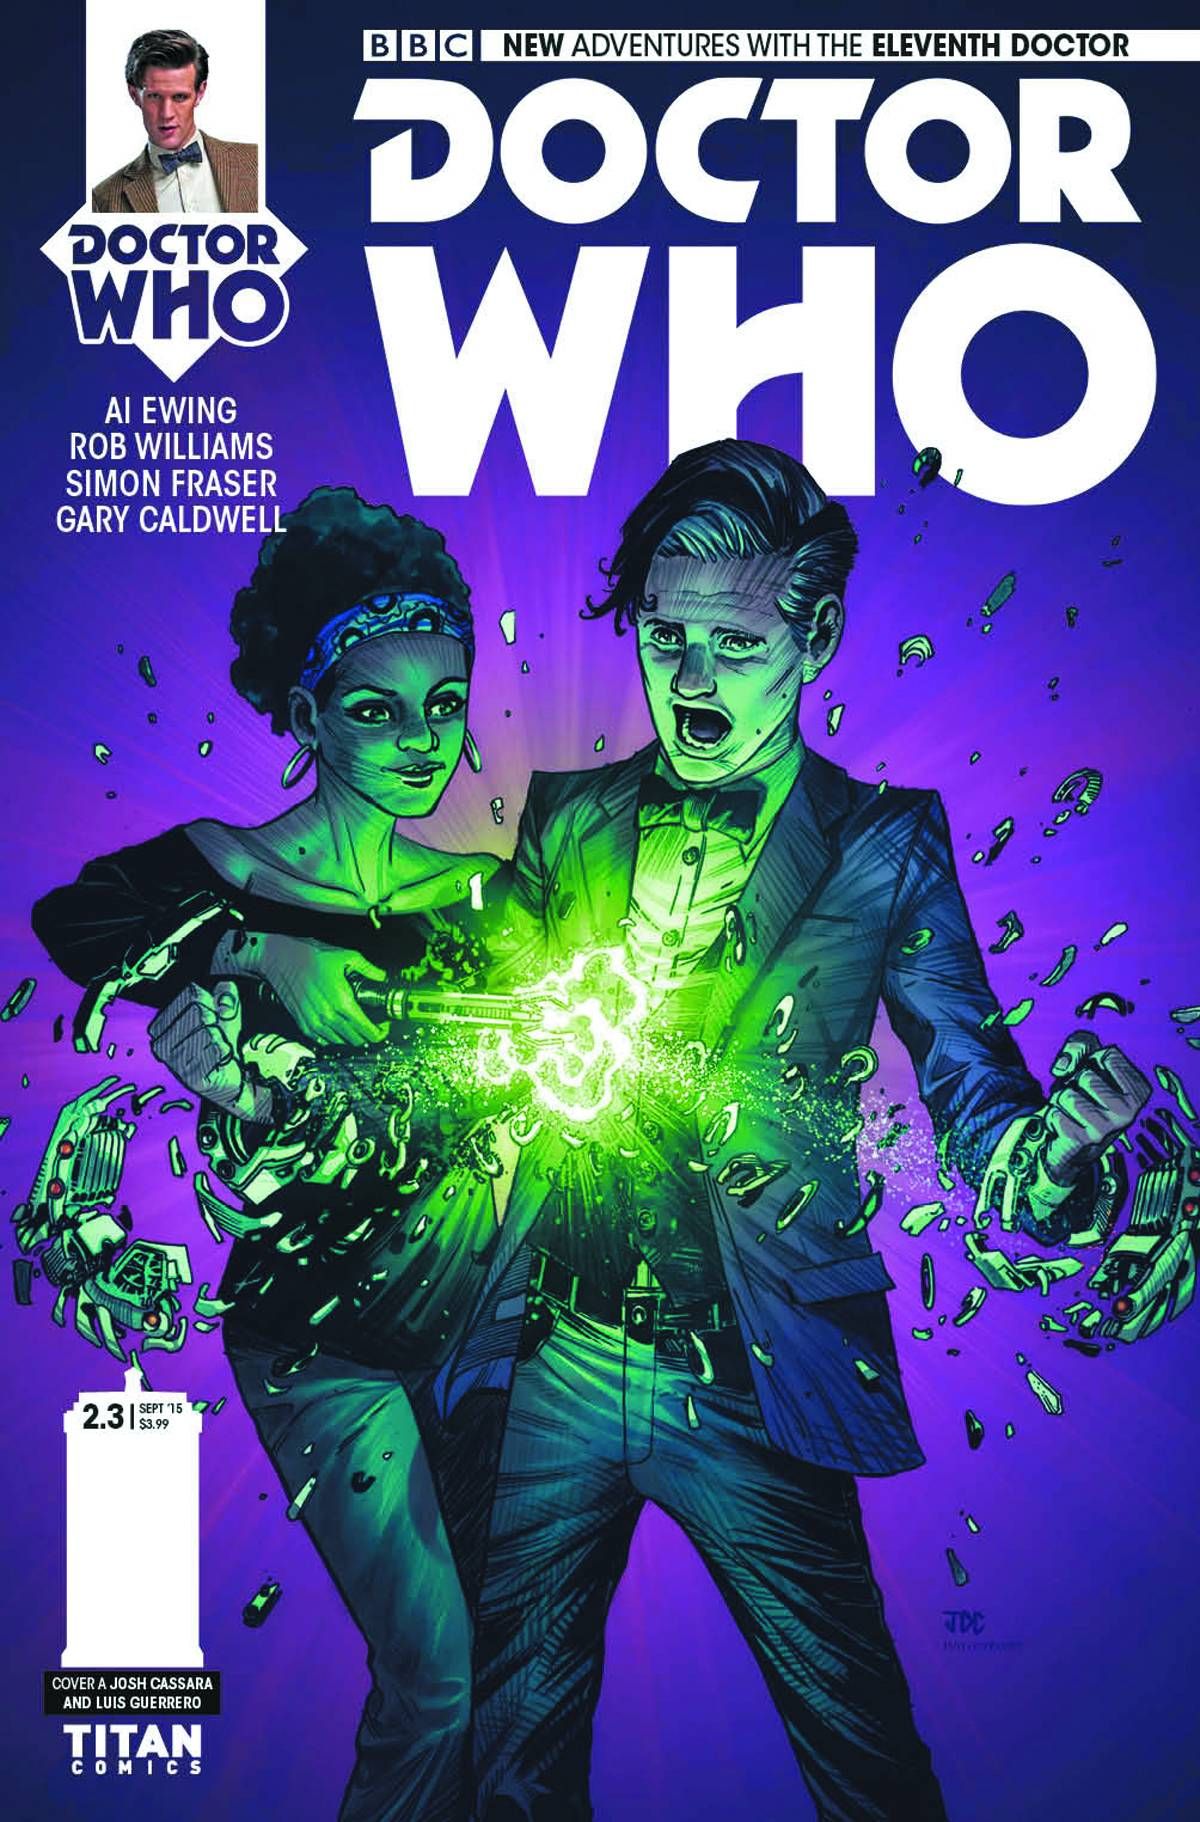 Doctor Who 11th Year 2 #3 Comic